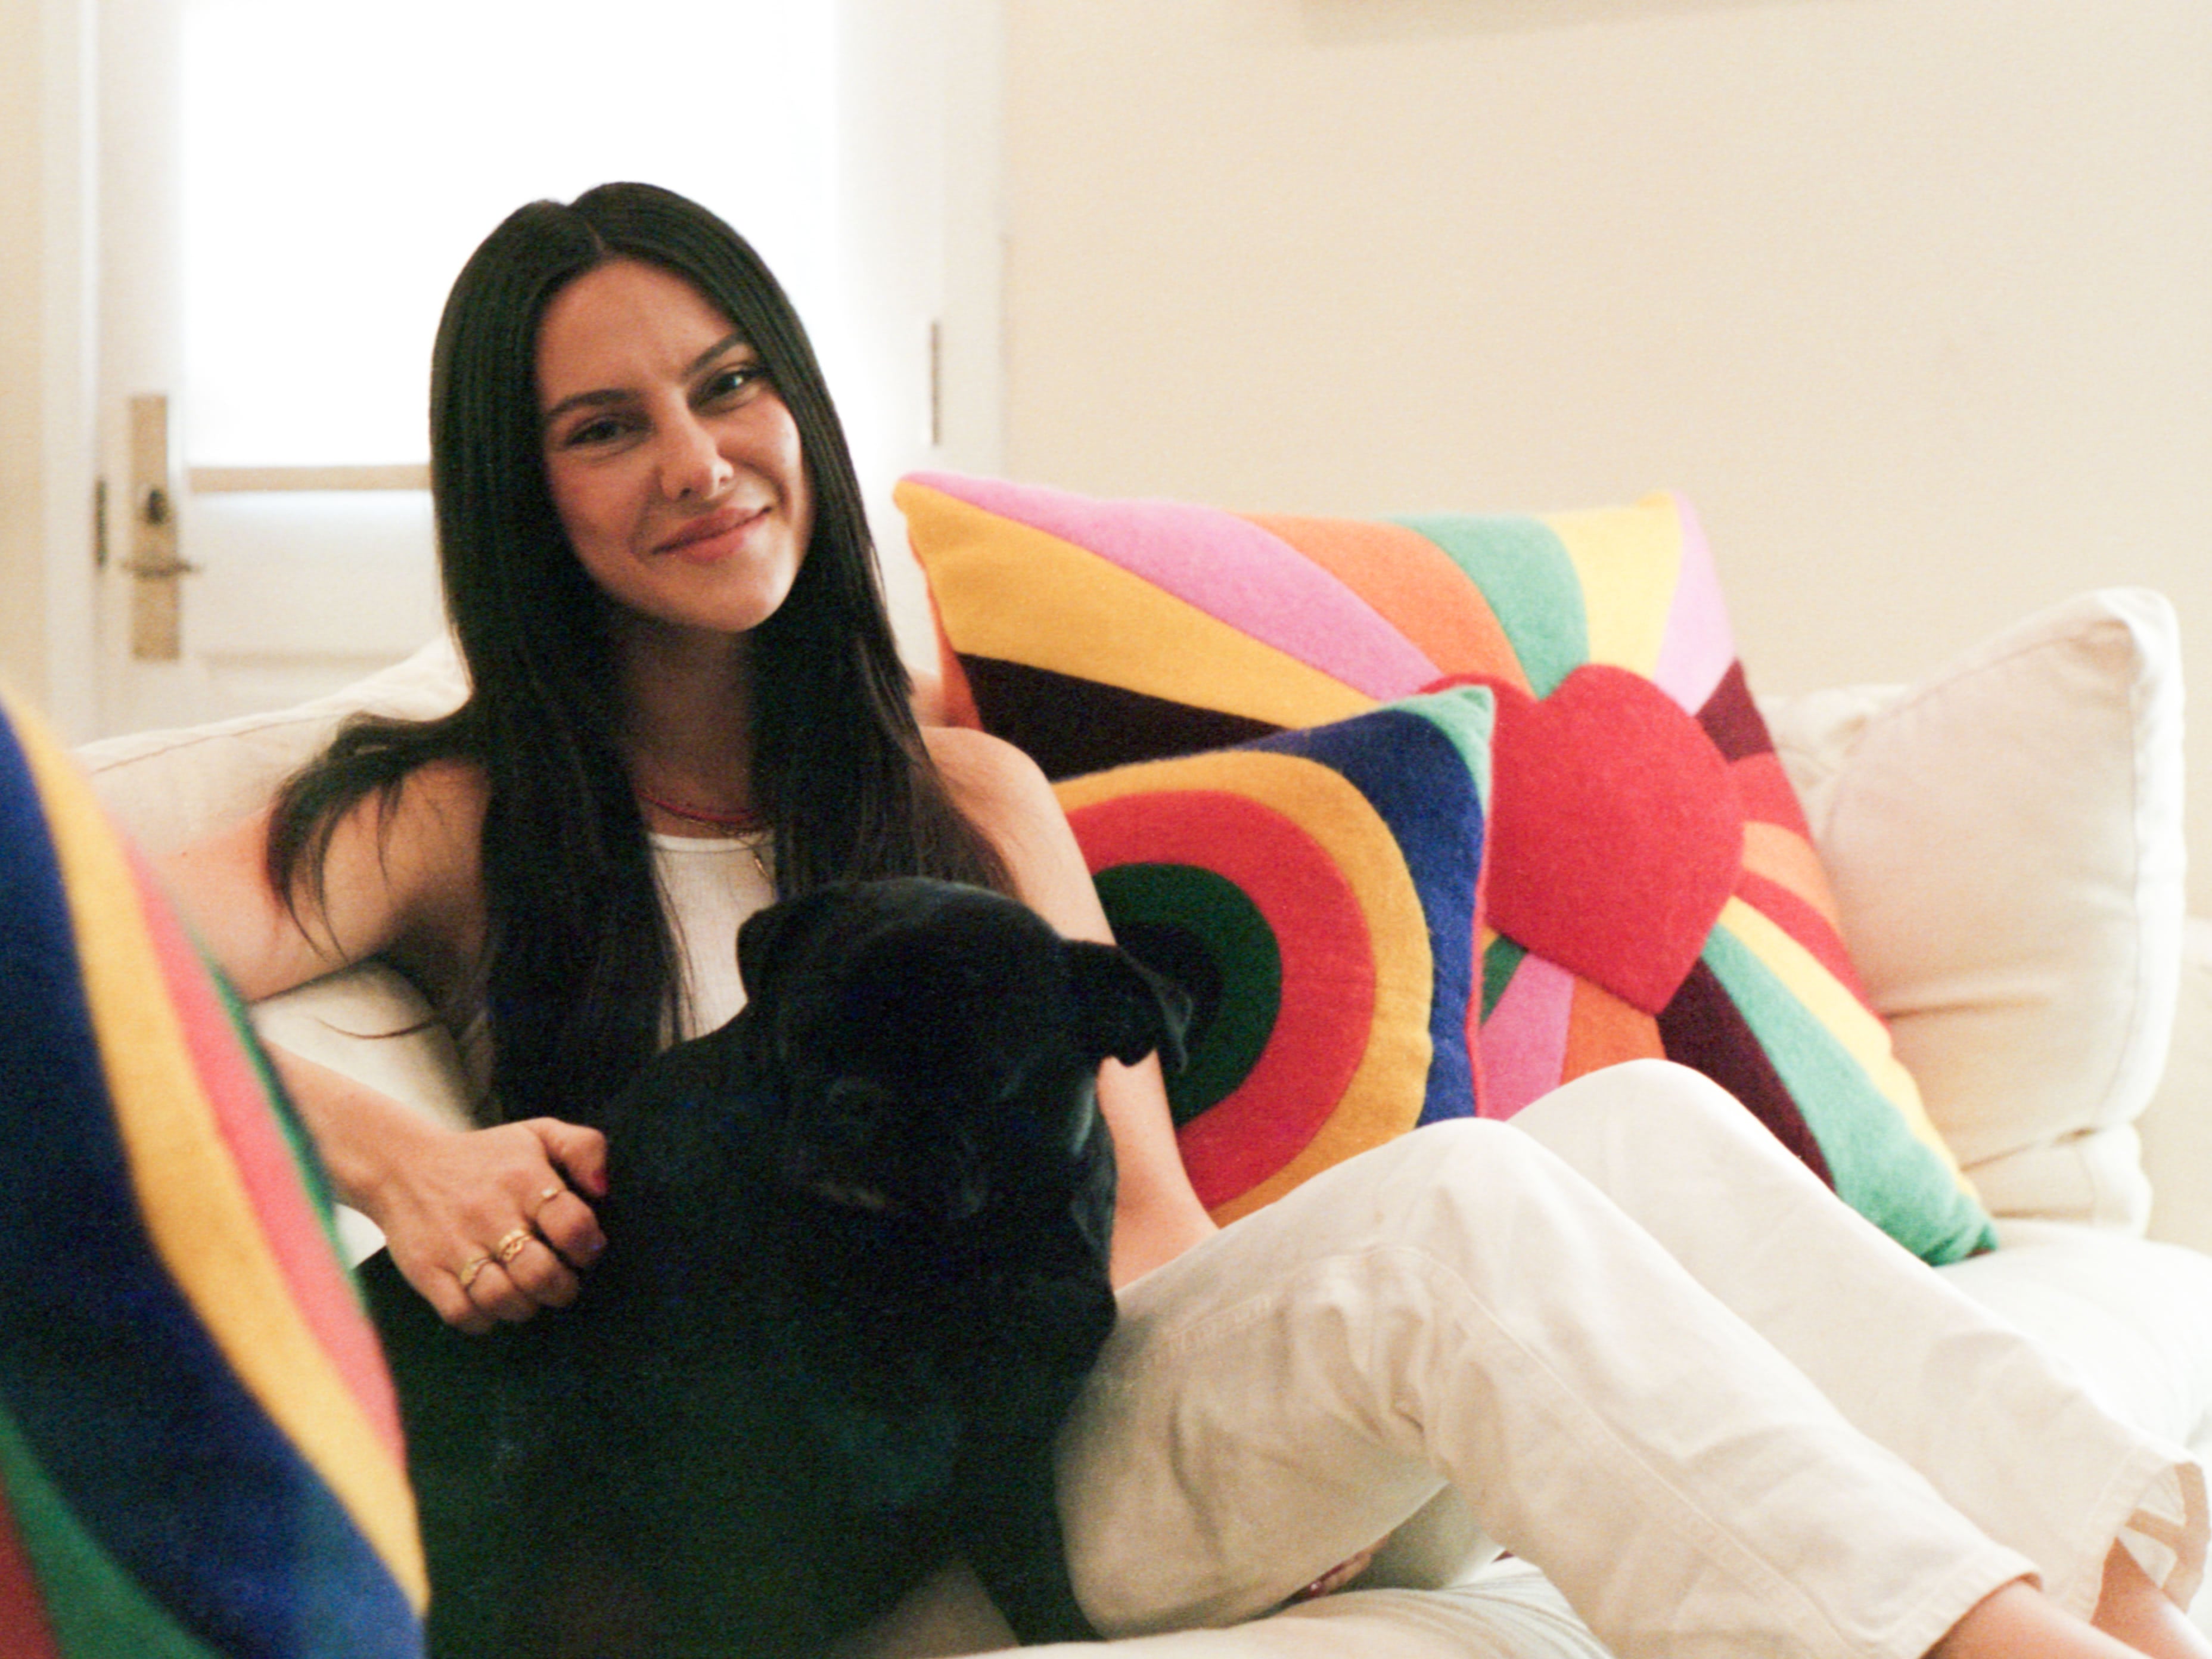 Live From Bed Podcast Host, Jade Iovine sitting on her living room couch with her dog